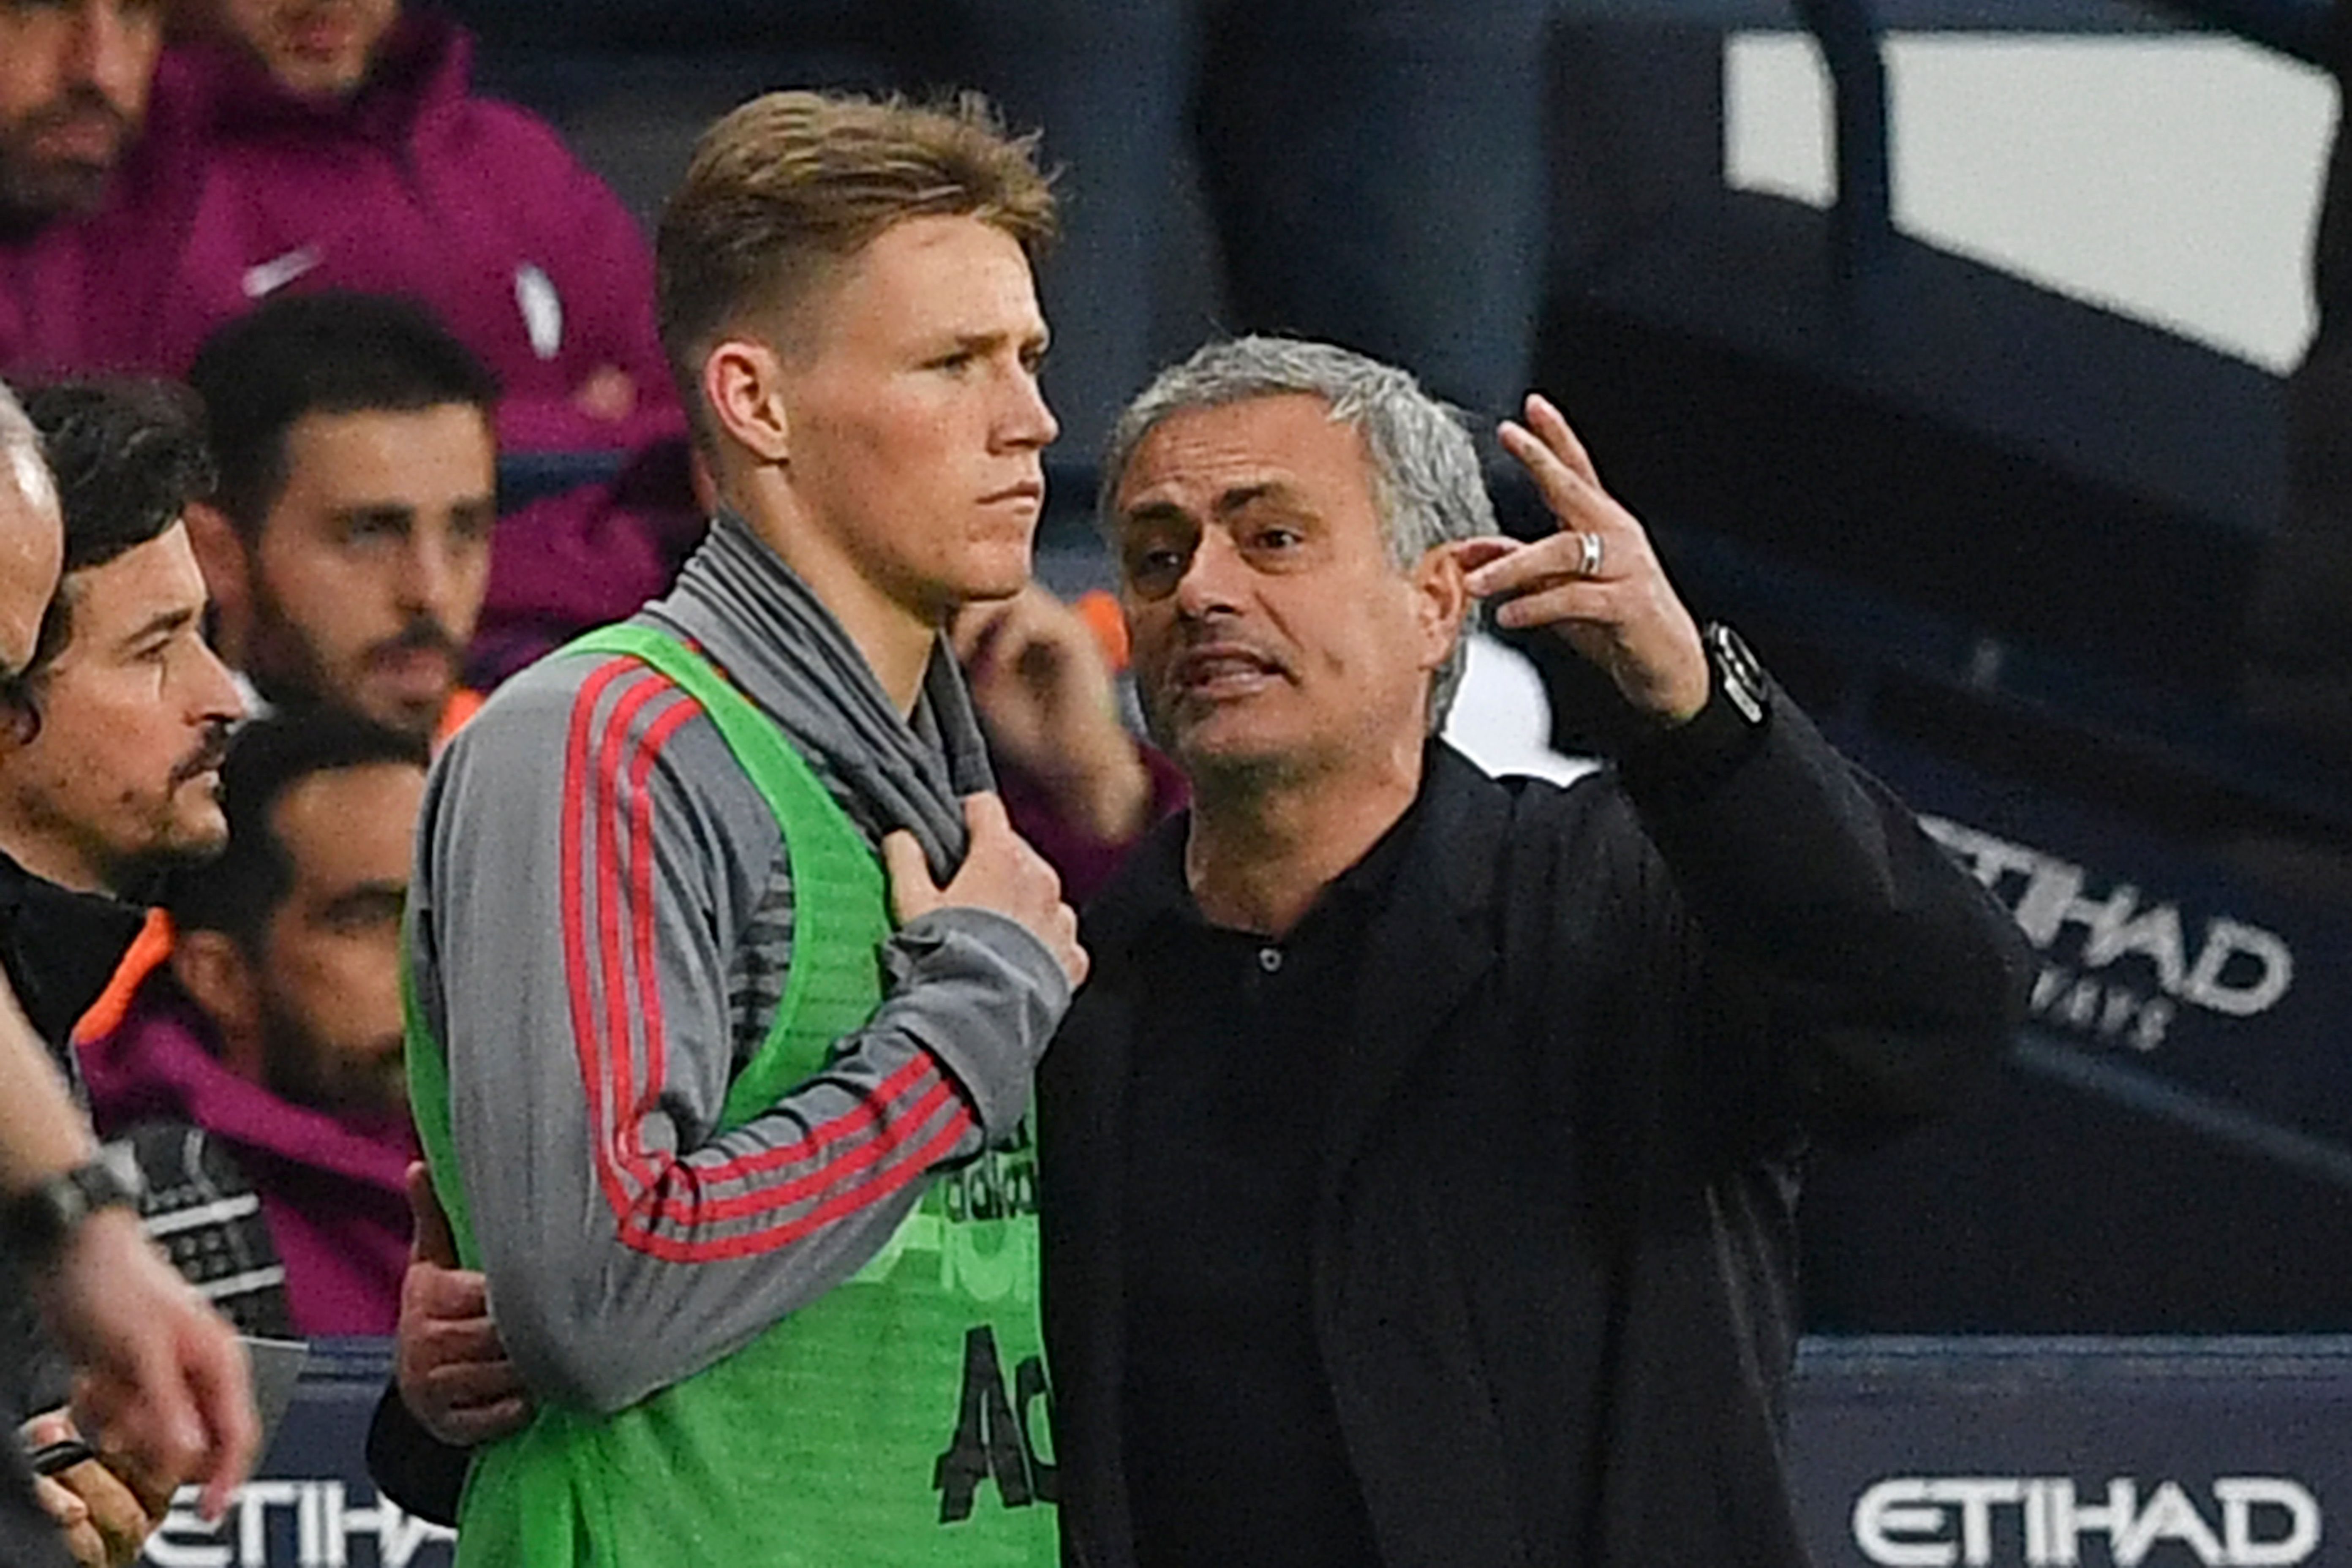 Manchester United's Portuguese manager Jose Mourinho (R) talks with Manchester United's midfielder Scott McTominay (L) on the touchline during the English Premier League football match between Manchester City and Manchester United at the Etihad Stadium in Manchester, north west England, on April 7, 2018. / AFP PHOTO / Ben STANSALL / RESTRICTED TO EDITORIAL USE. No use with unauthorized audio, video, data, fixture lists, club/league logos or 'live' services. Online in-match use limited to 75 images, no video emulation. No use in betting, games or single club/league/player publications.  /         (Photo credit should read BEN STANSALL/AFP/Getty Images)